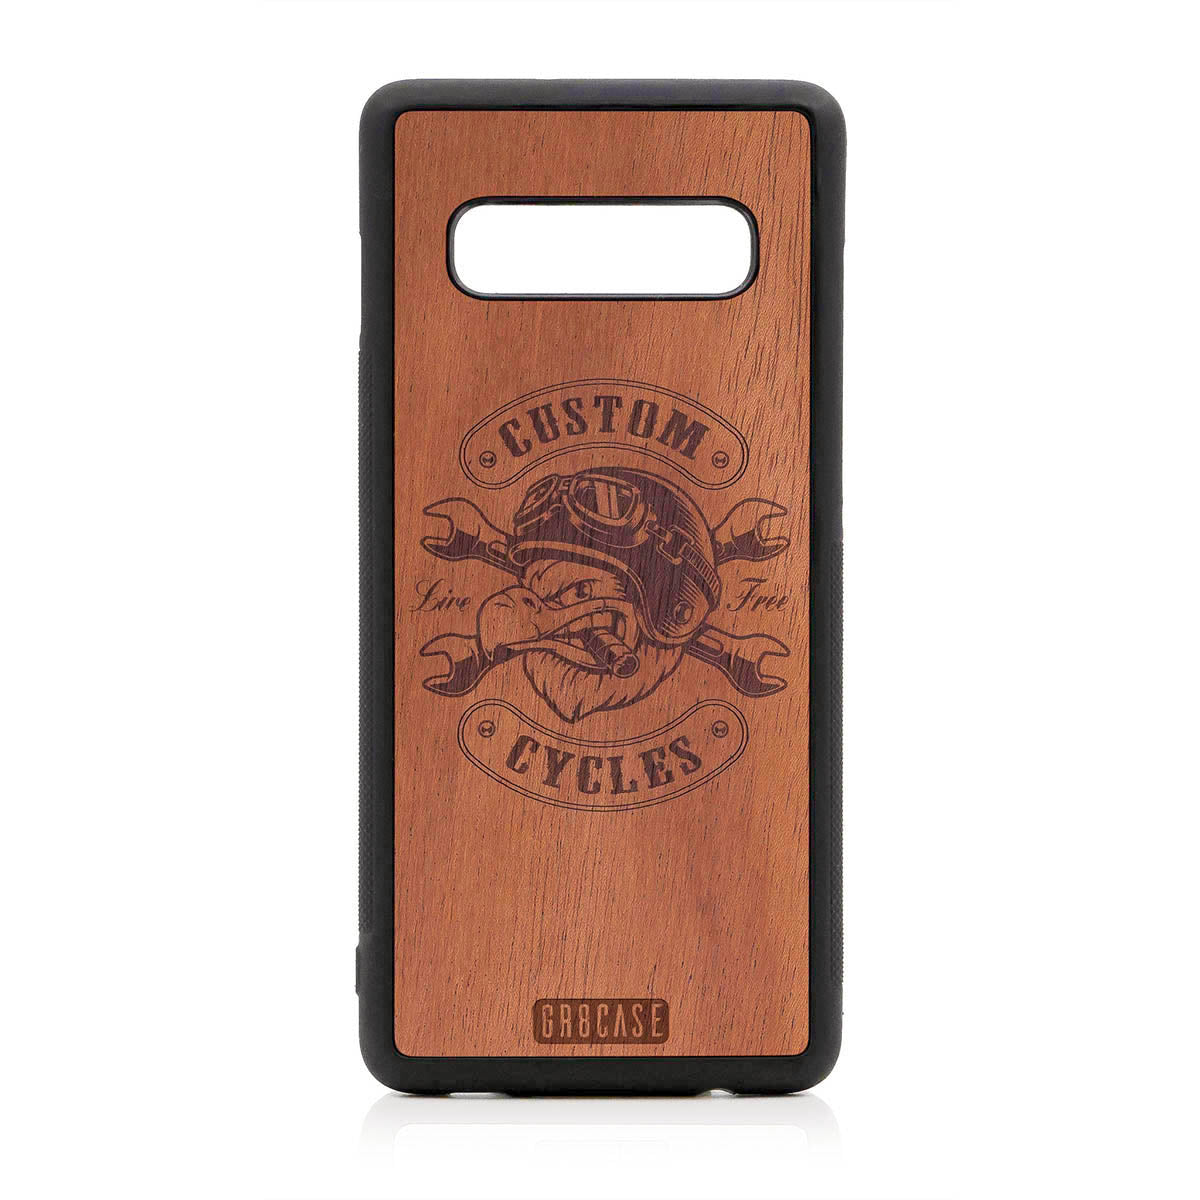 Custom Cycles Live Free (Biker Eagle) Design Wood Case For Samsung Galaxy S10 by GR8CASE